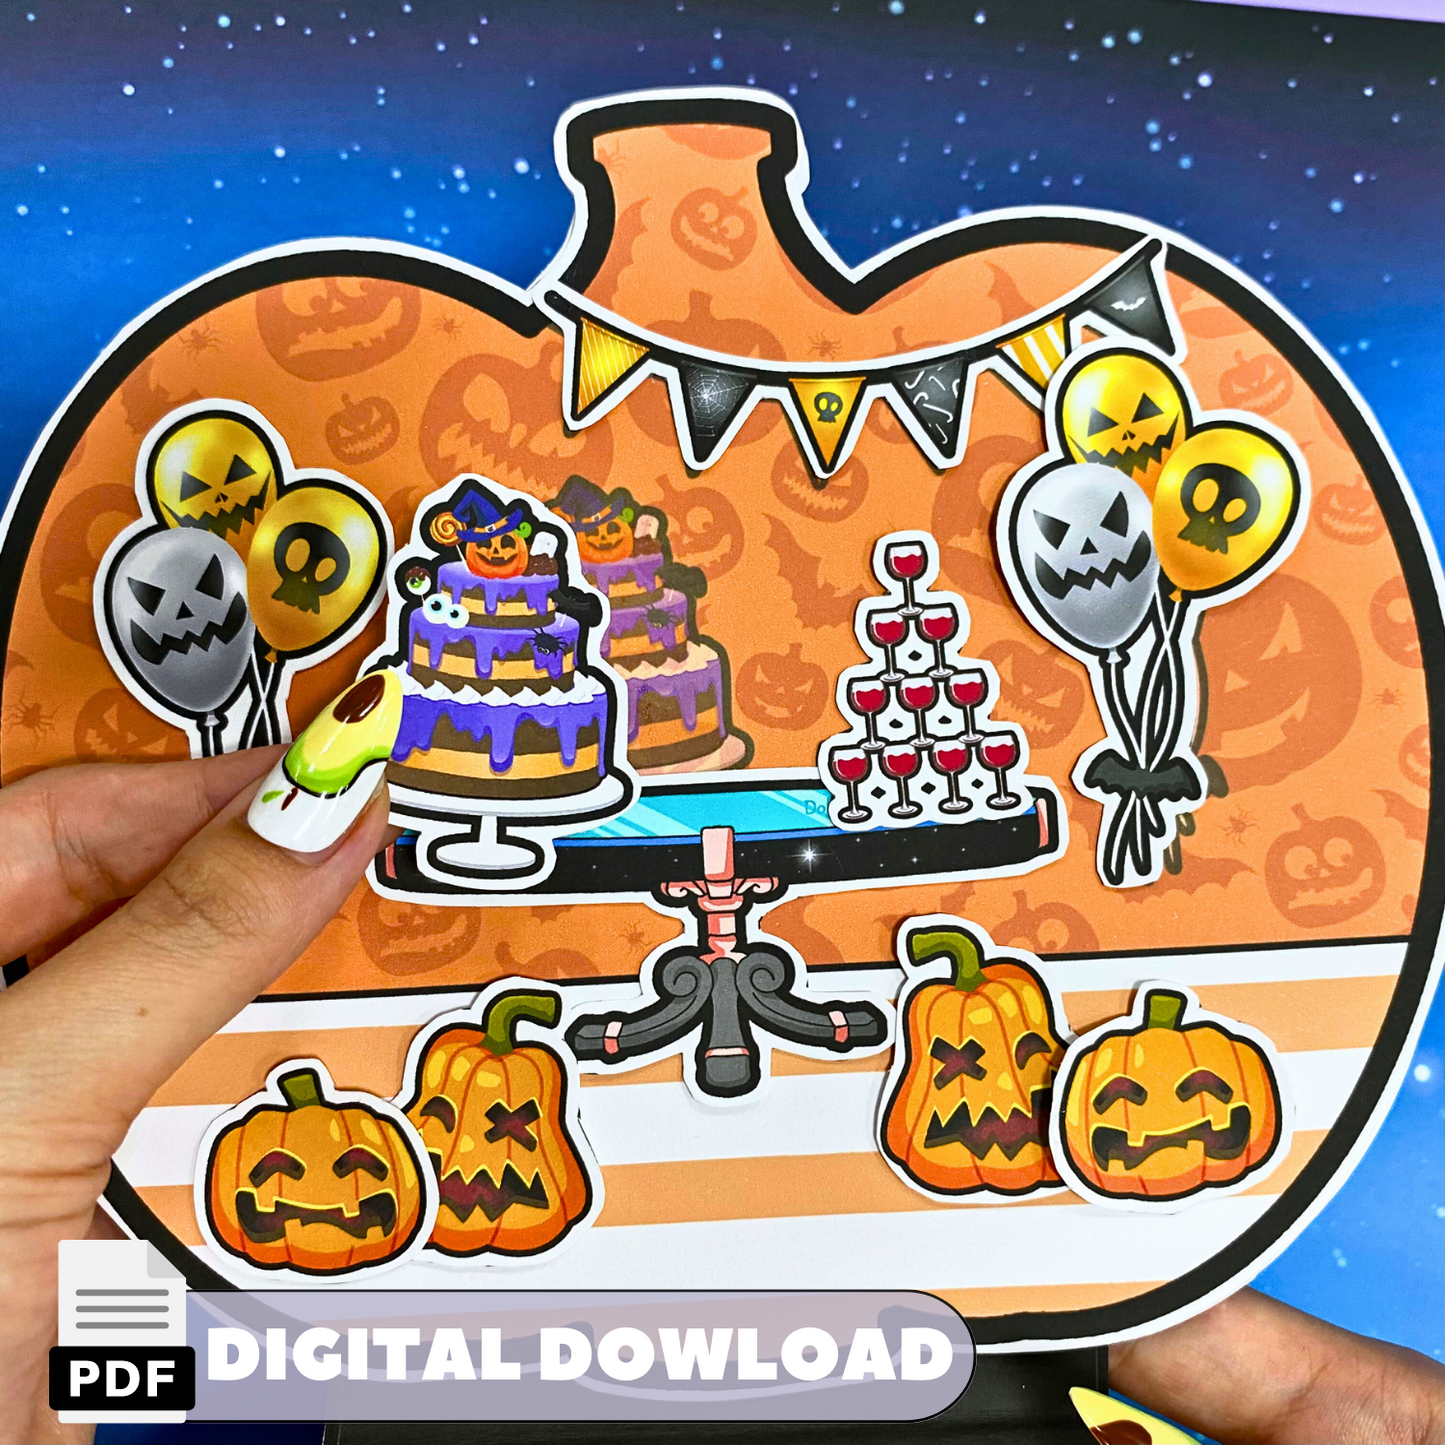 Pumpkin dollhouse for Halloween party printable 🌈 Activities book printable | Printable Gothic Dollhouse Busy book  🌈 Woa Doll Crafts